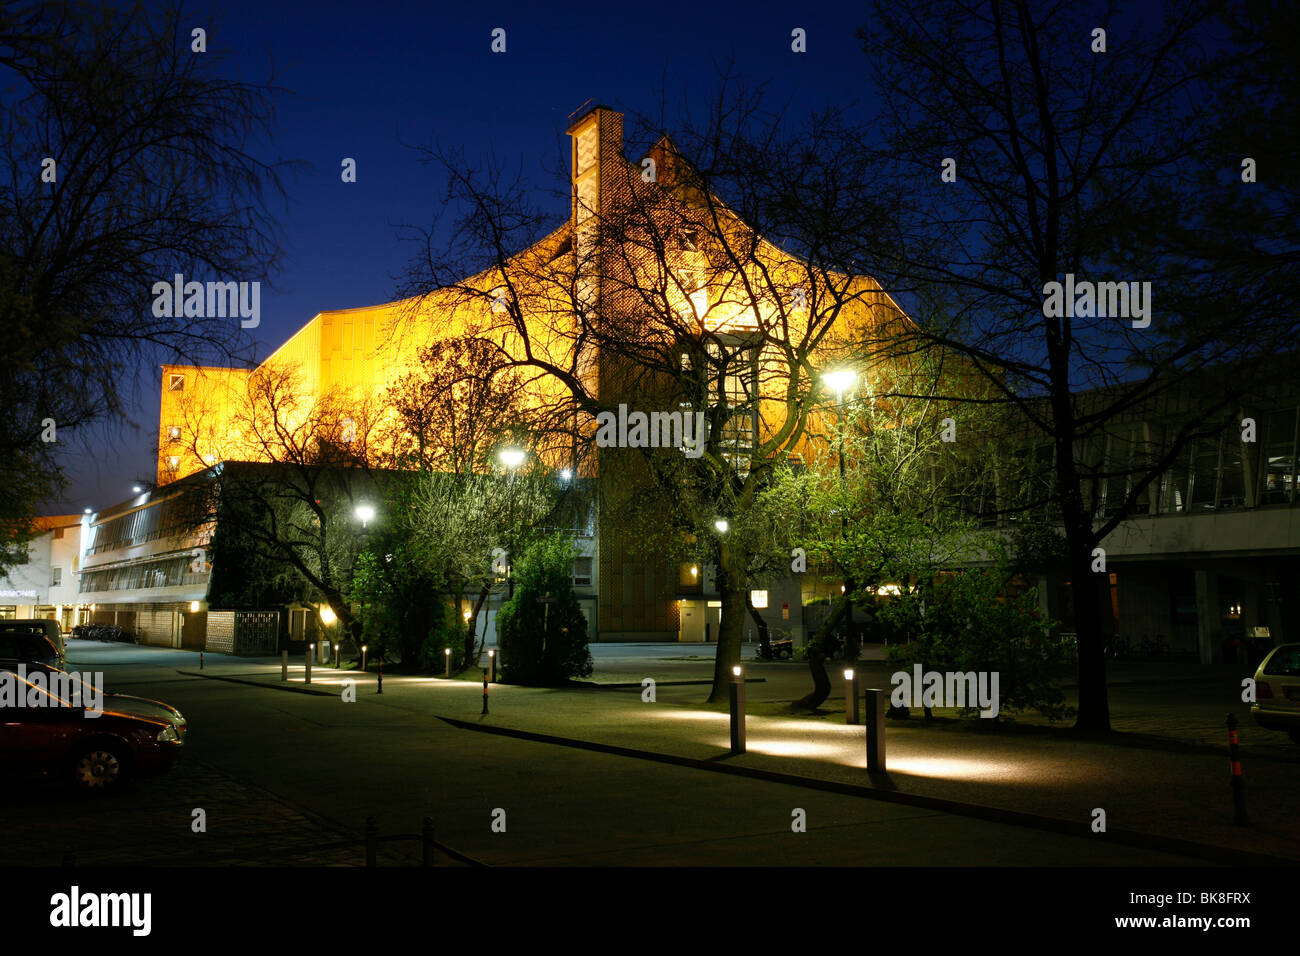 Berliner Philharmonie concert hall, at dusk, on Kemperplatz Square, homestead of the Berlin Philharmonic Orchestra, Berlin, Ger Stock Photo